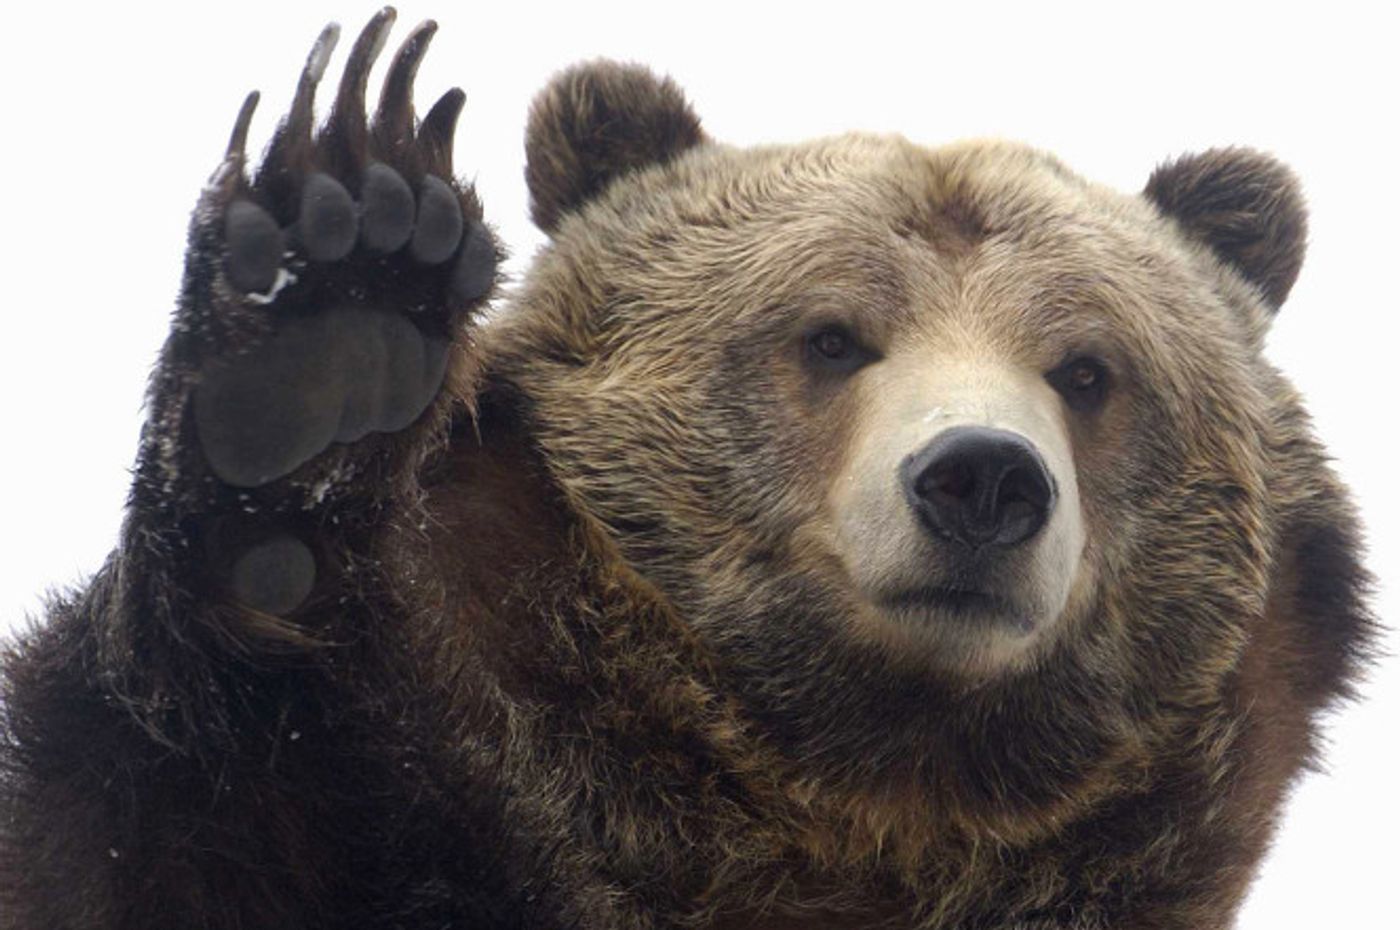 Grizzly bear attacks can be fatal; Todd Orr was one of the lucky ones.